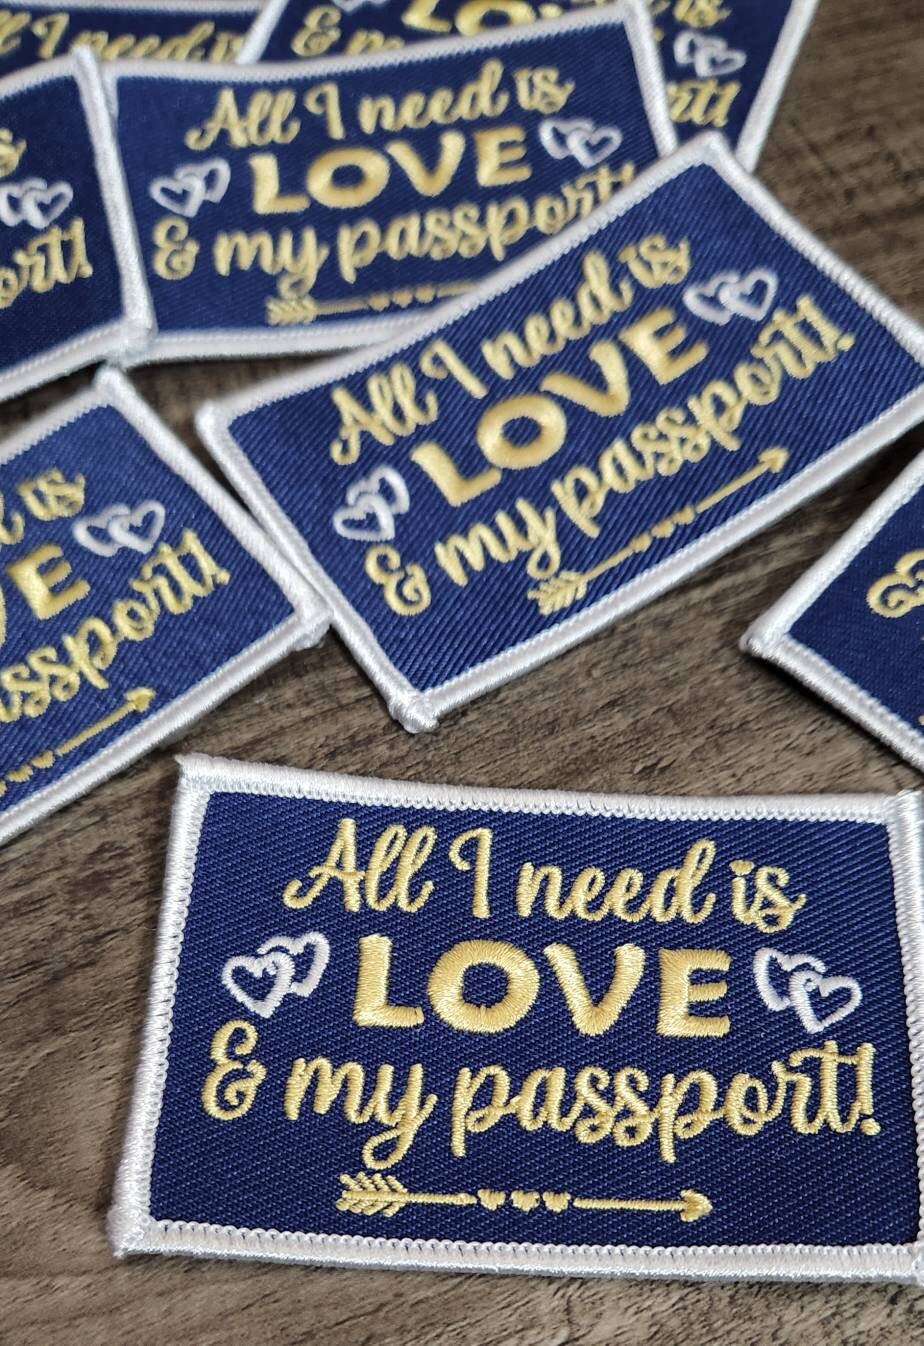 Travel Patch| "All I Need is Love & My Passport" 1-pc, Iron-on Embroidered Patch,  Size 3" x 2" Patch, For Lovers of Travel, Wanderlust